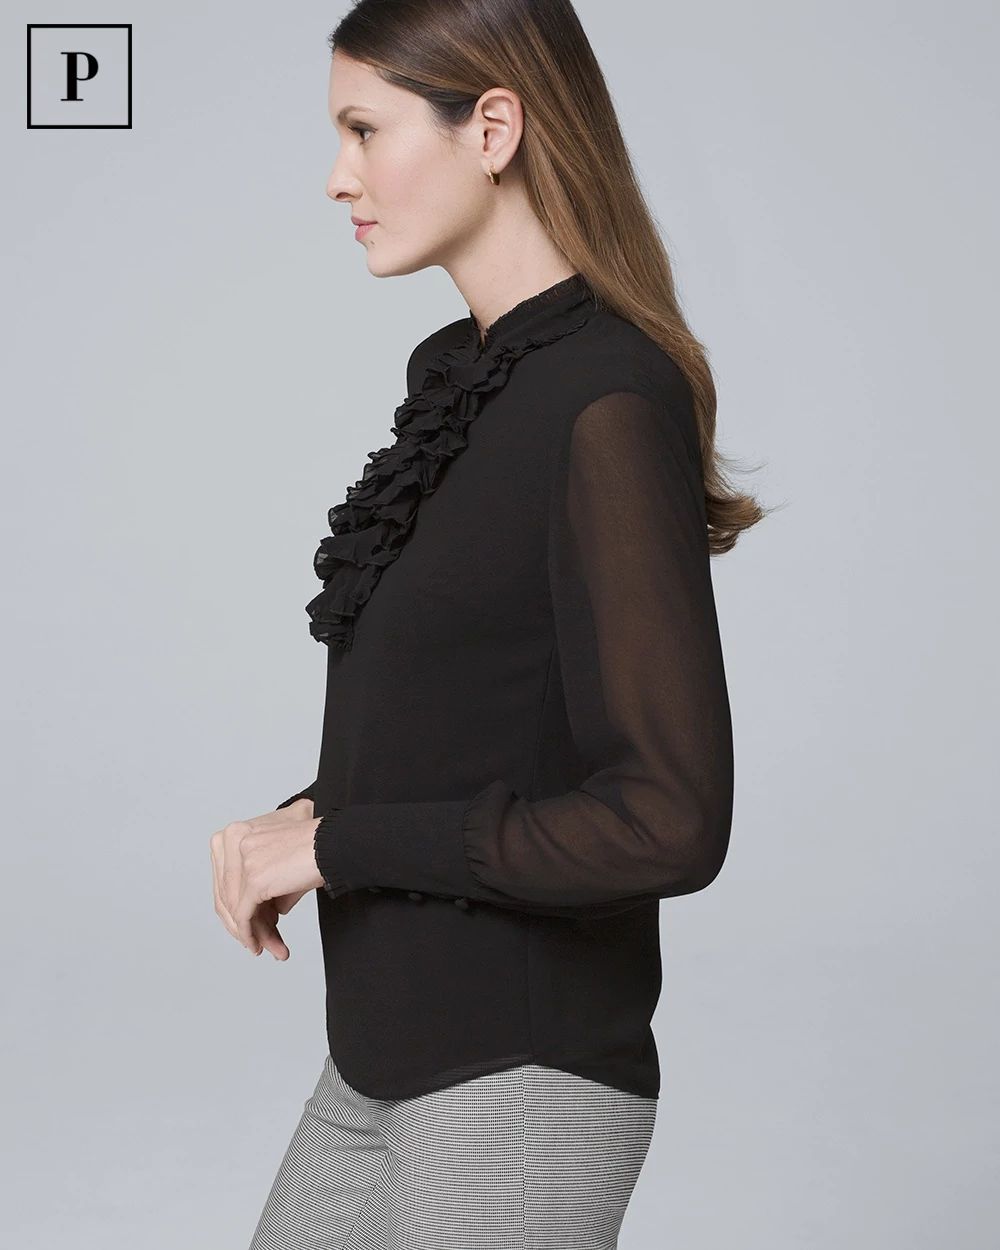 Petite Pleated Ruffle-Trim Blouse click to view larger image.